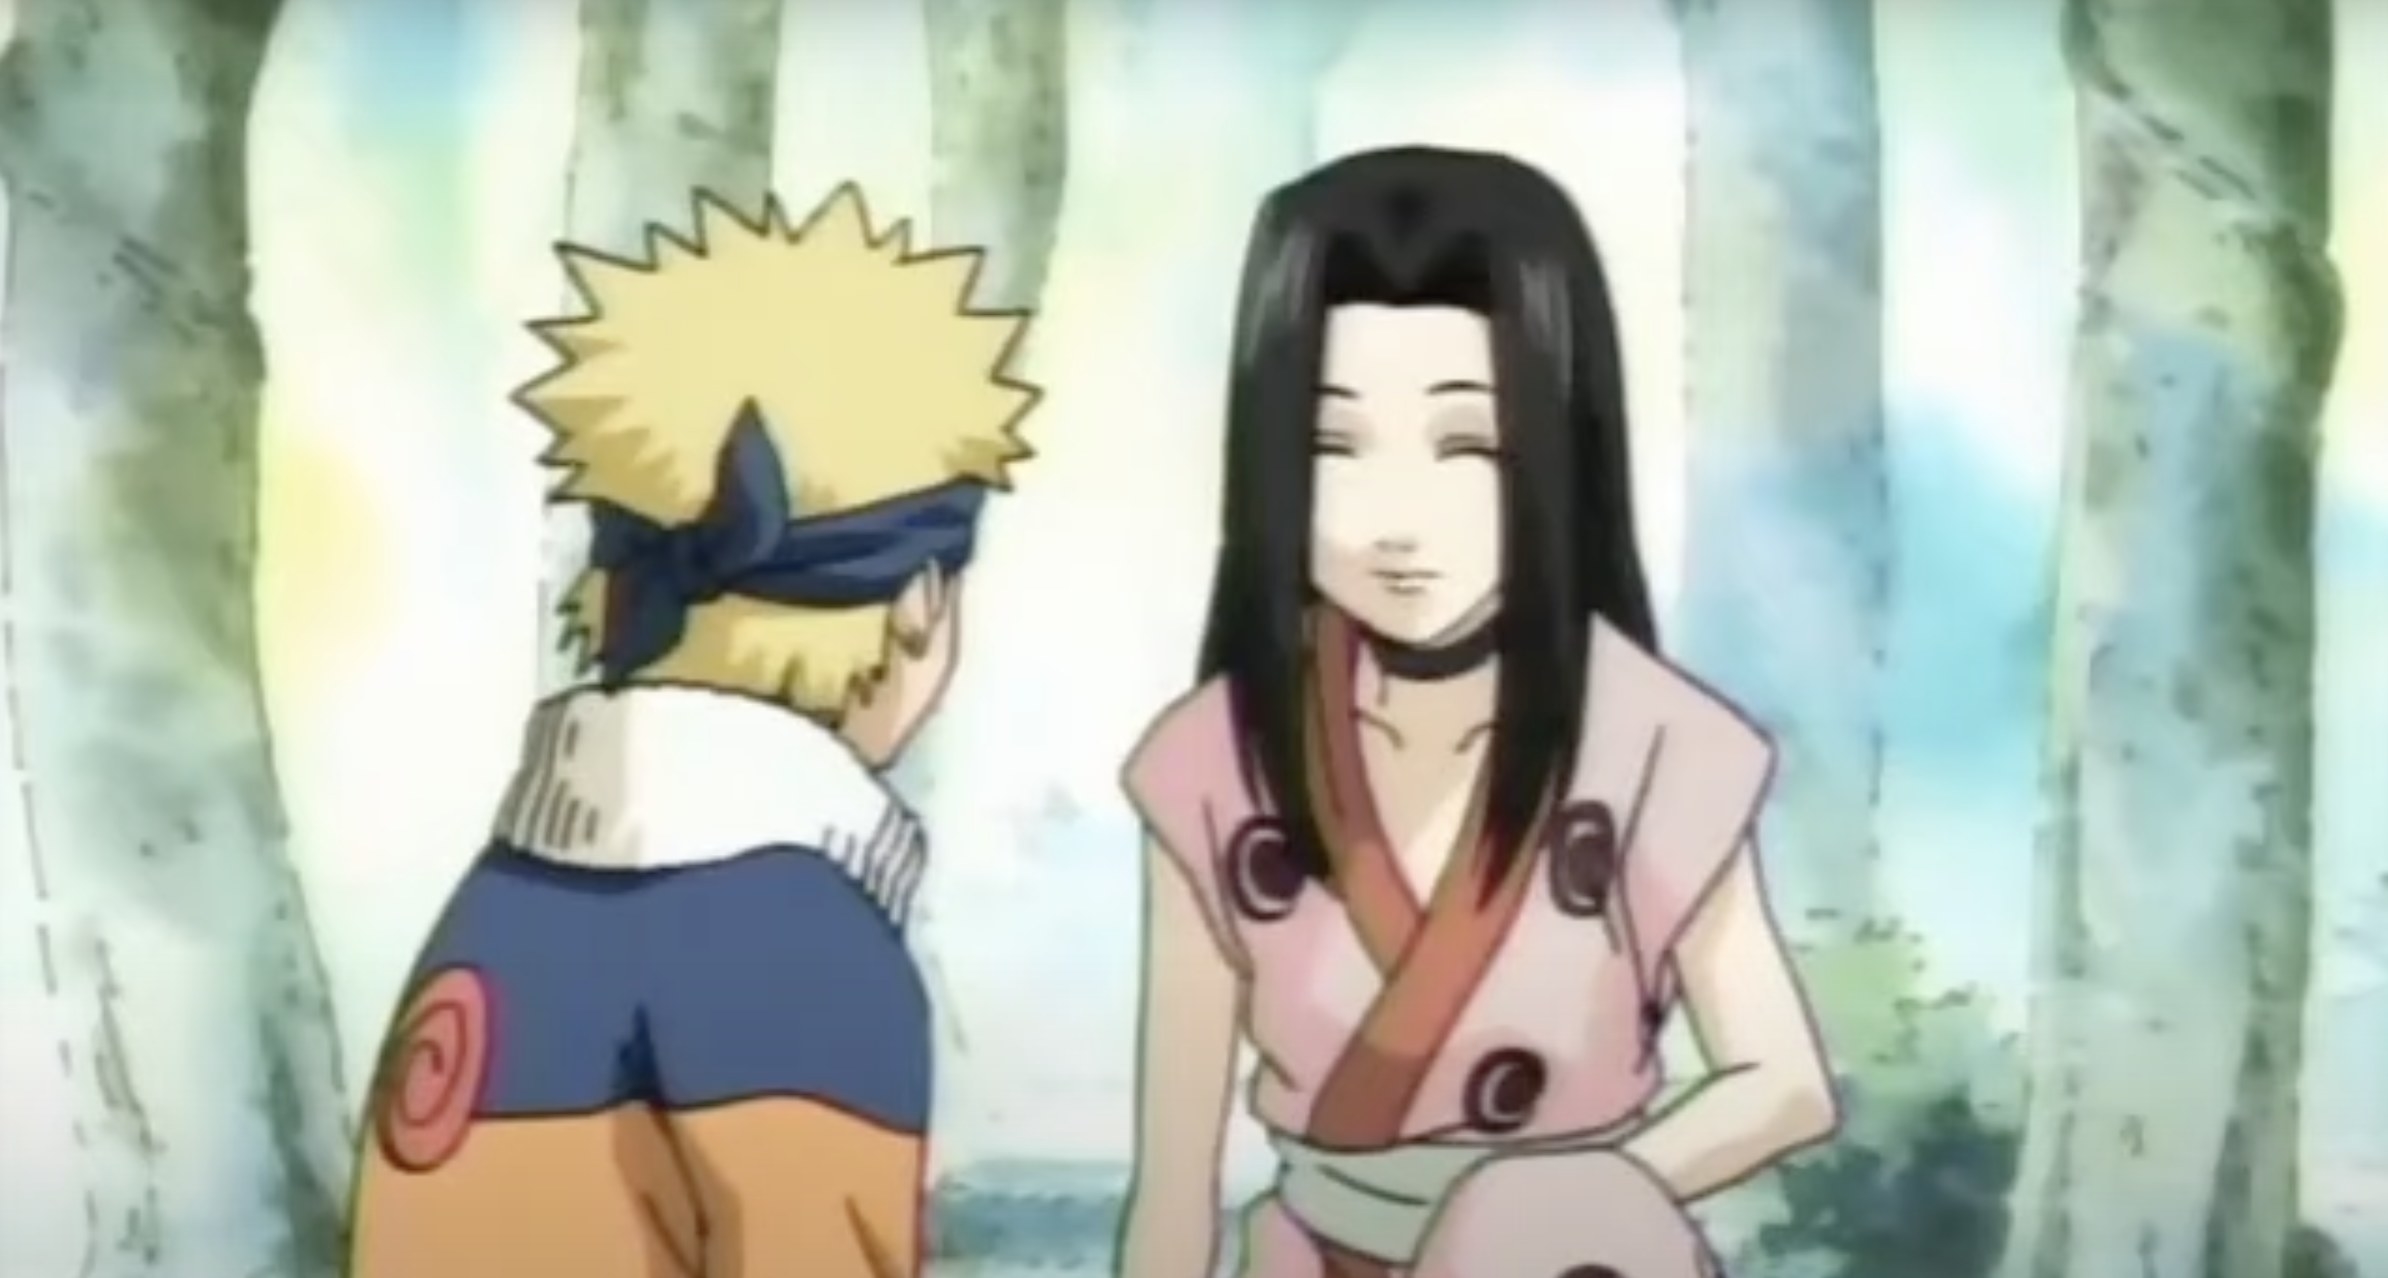 Naruto meets a well dressed and smiling Haku